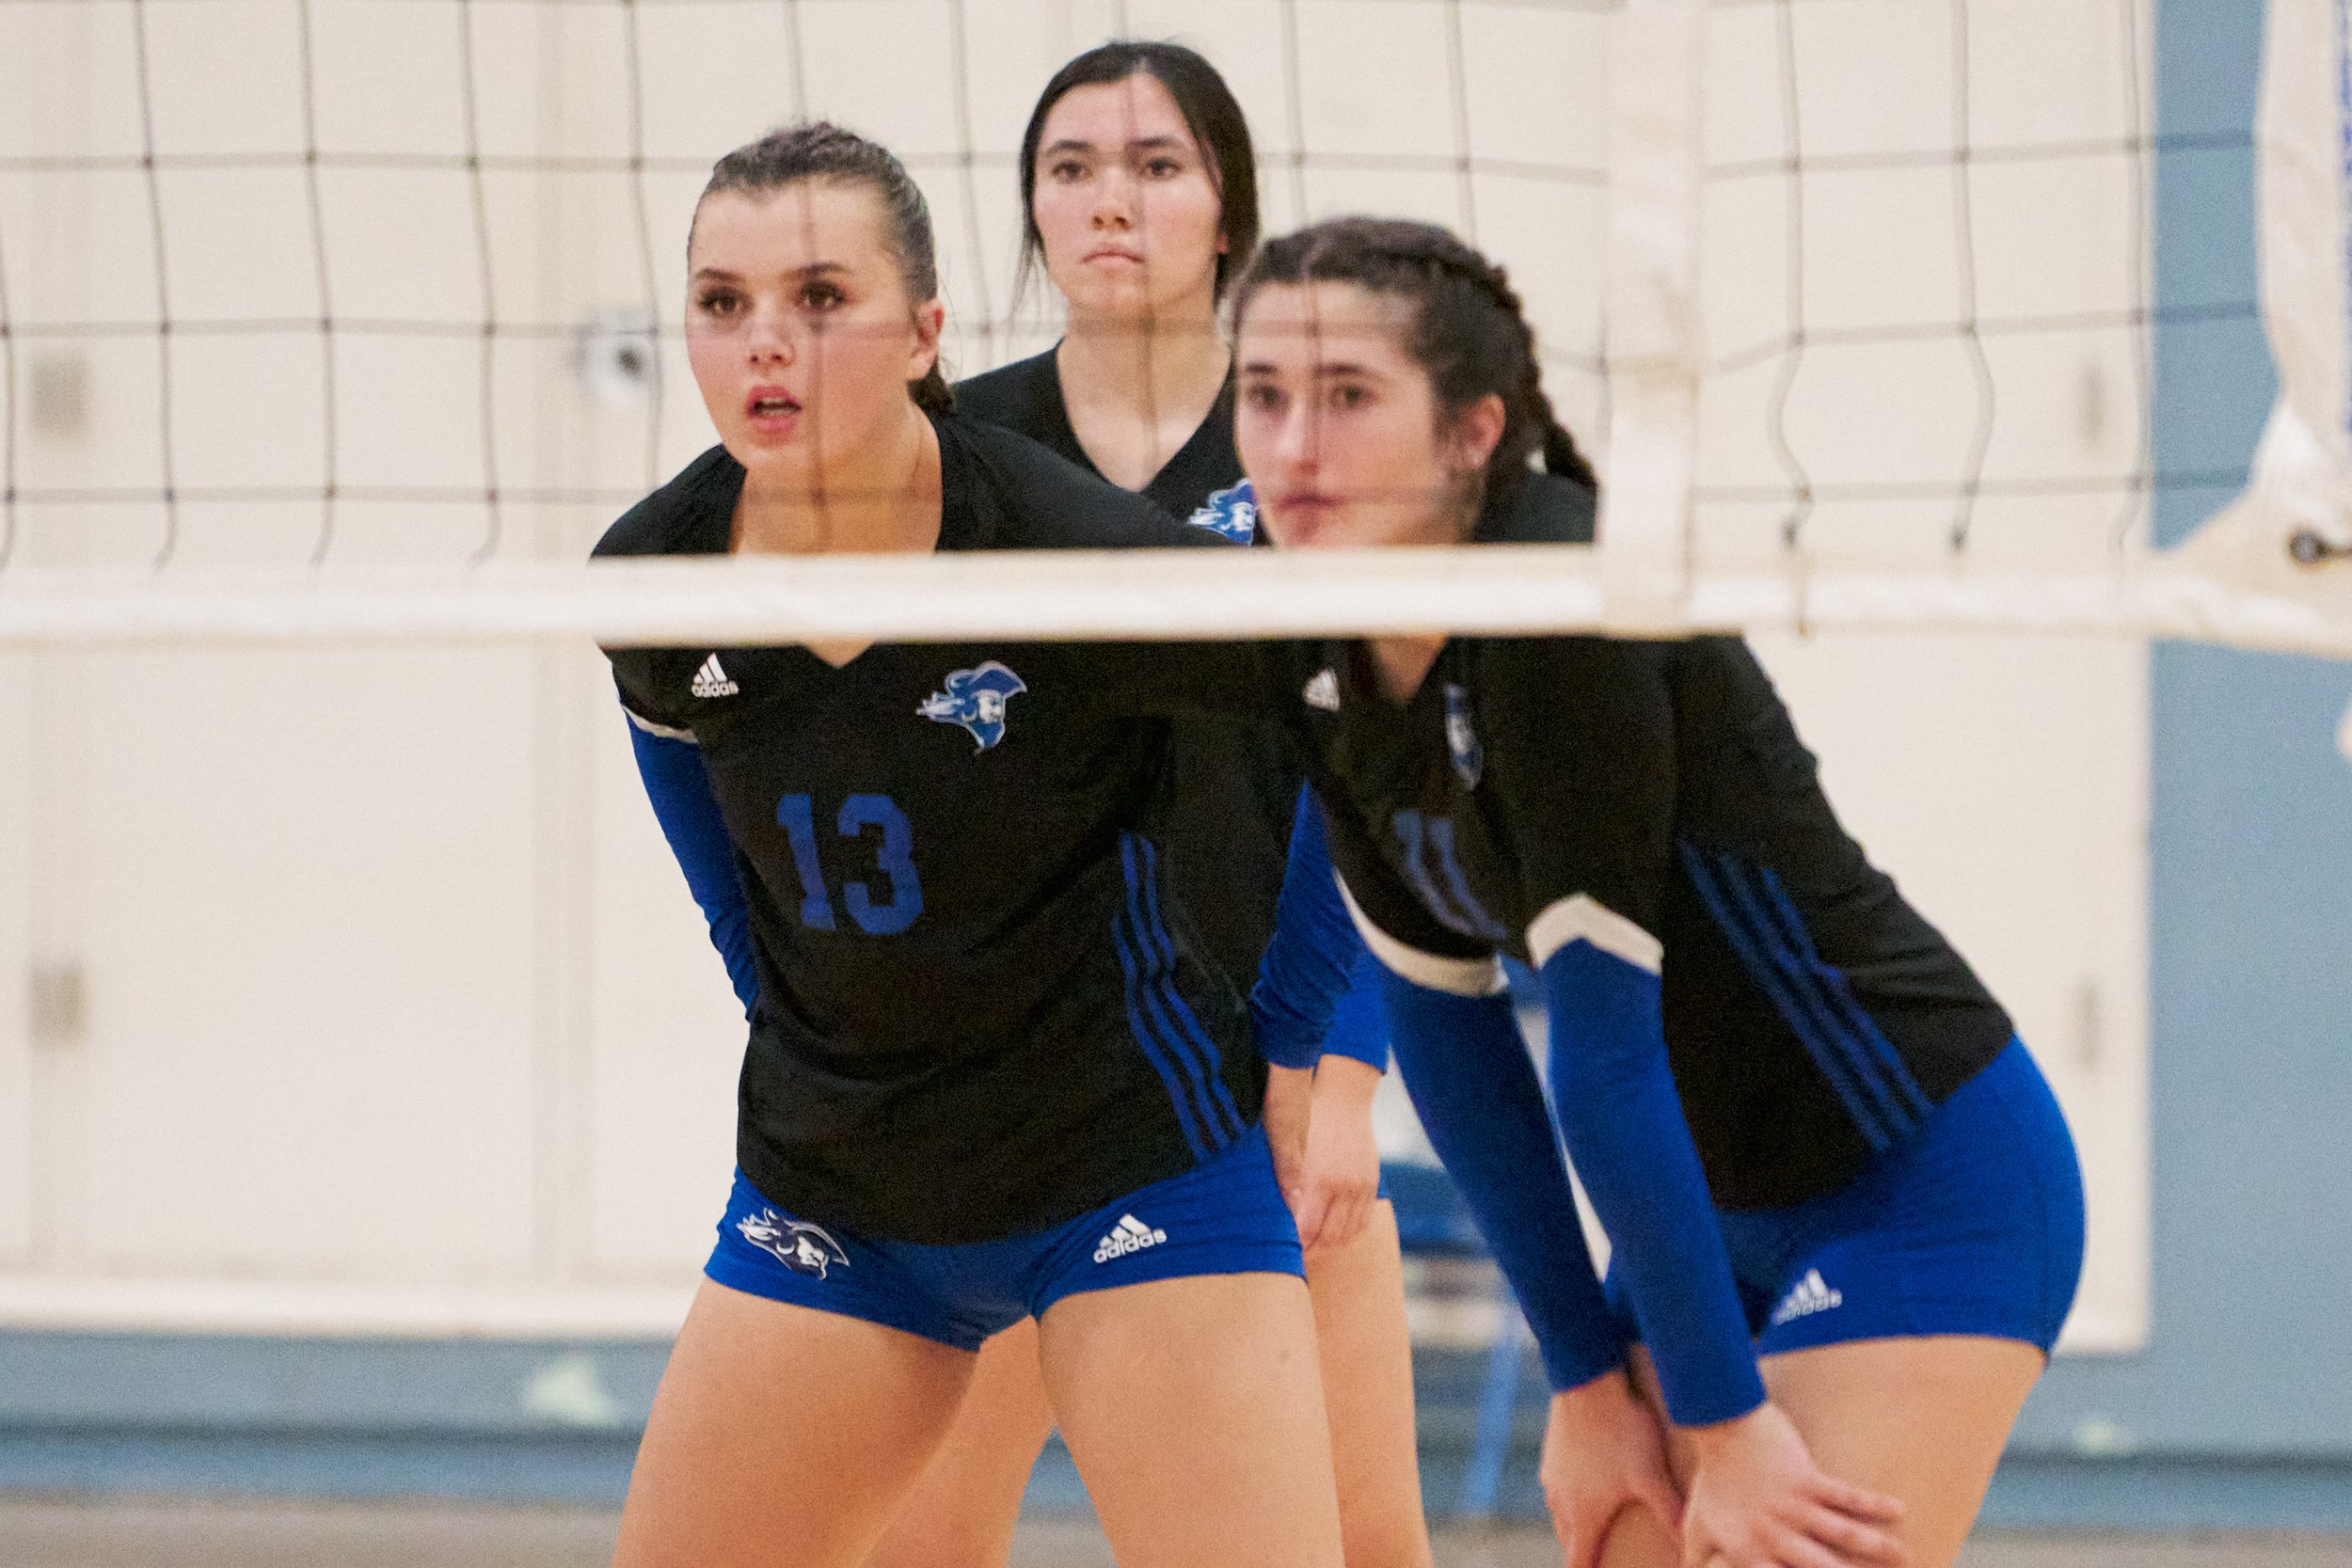  Santa Monica College Corsairs' Mackenzie Wolff, Sophia Odle, and Maiella Riva during the women's volleyball match against the Los Angeles Mission College Eagles on Friday, October 7, 2022, at the Corsair Gym in Santa Monica, Calif. The Corsairs won 